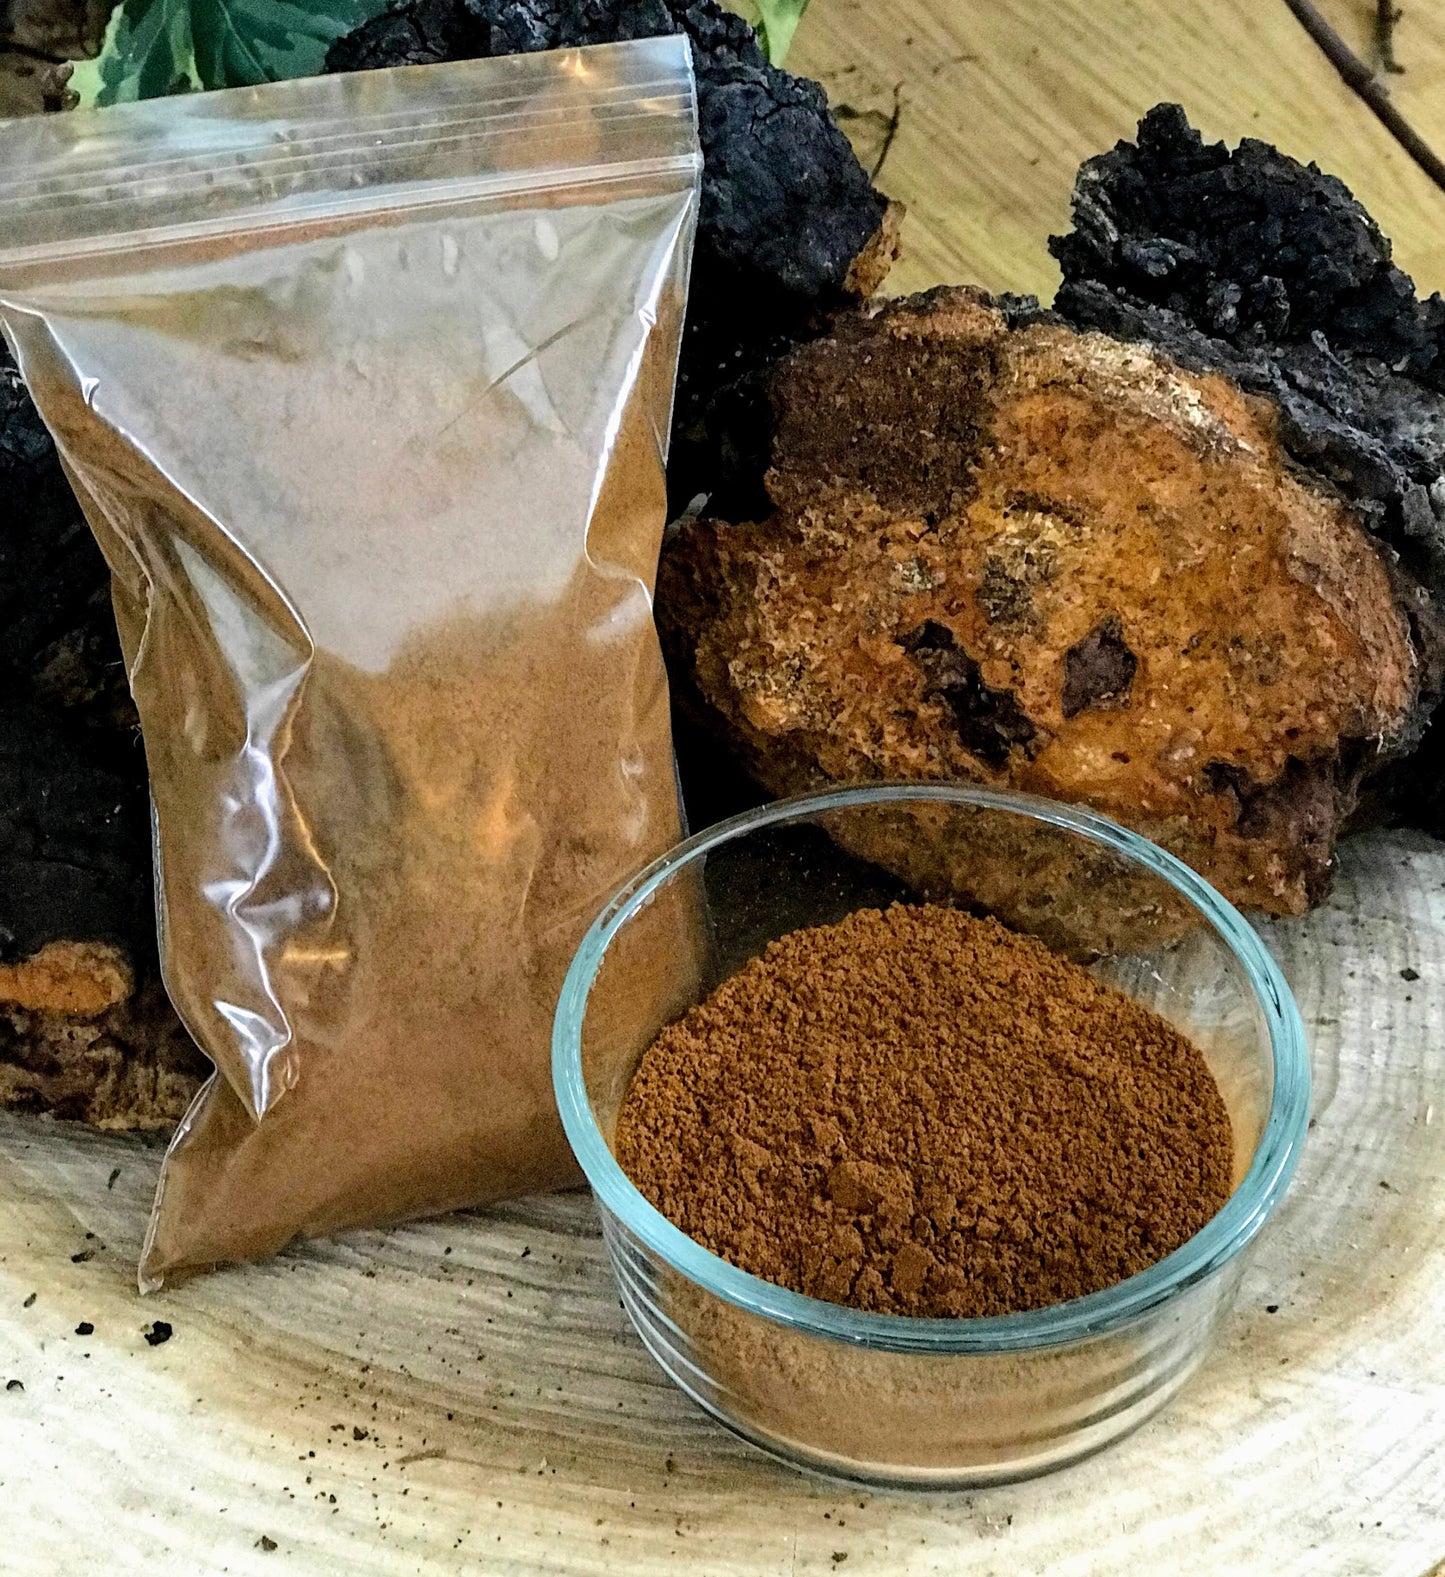 Chaga mushroom tincture Double extracted and 2 oz powdered Chaga for blending in smoothies, drinks and foods /Willow Moon